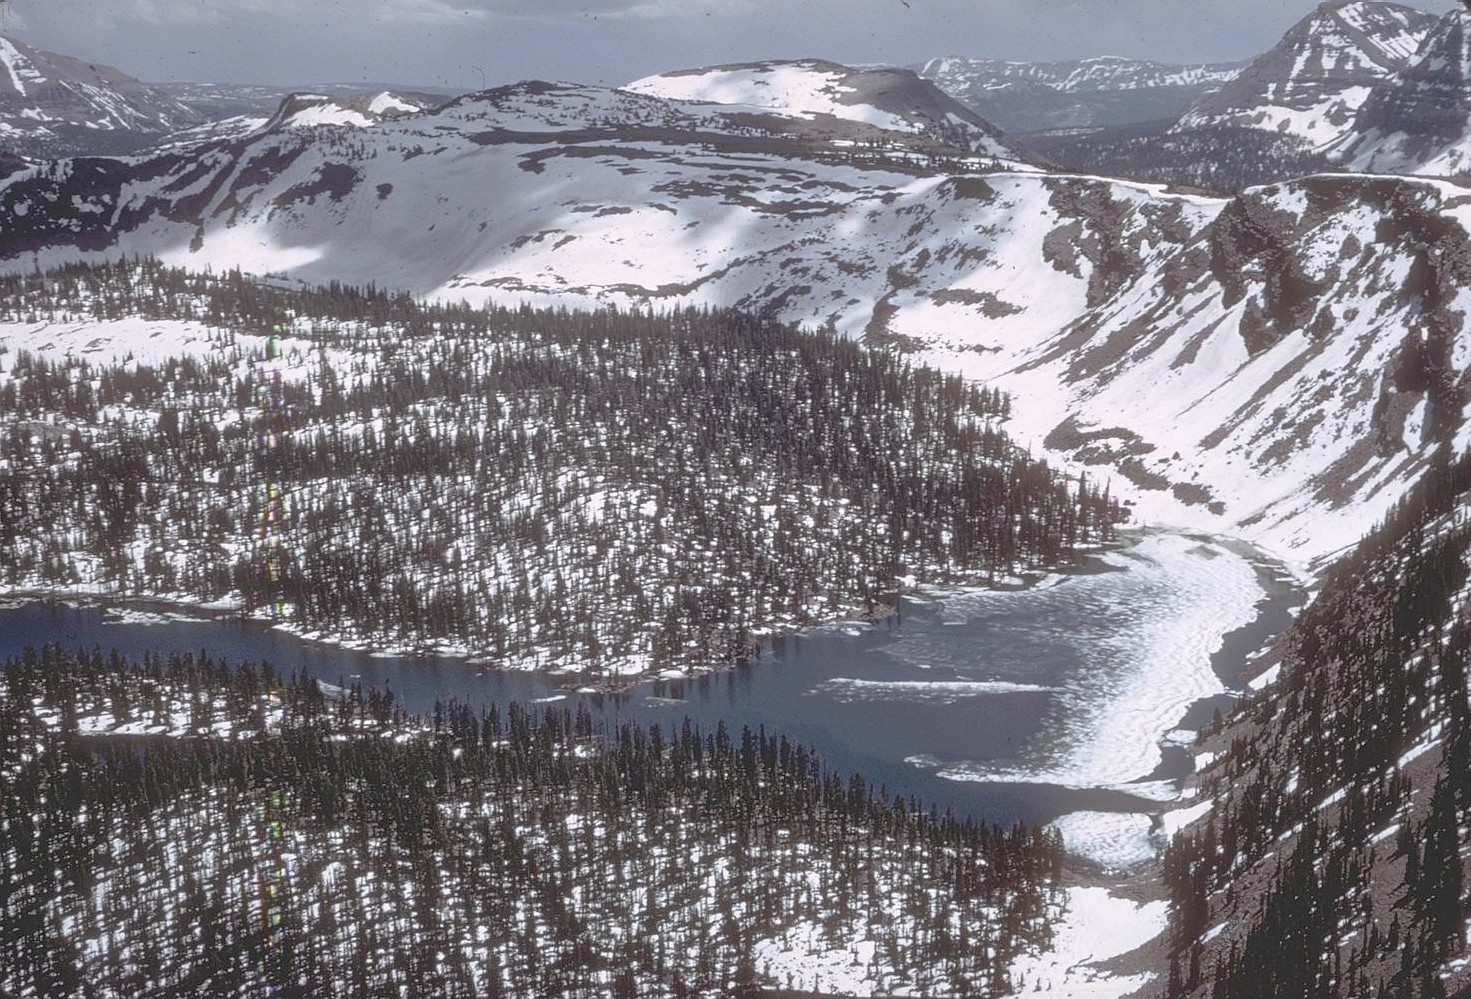 Photo depicting a high mountain basin with a lake in the High Uintas Wildrness in Winter